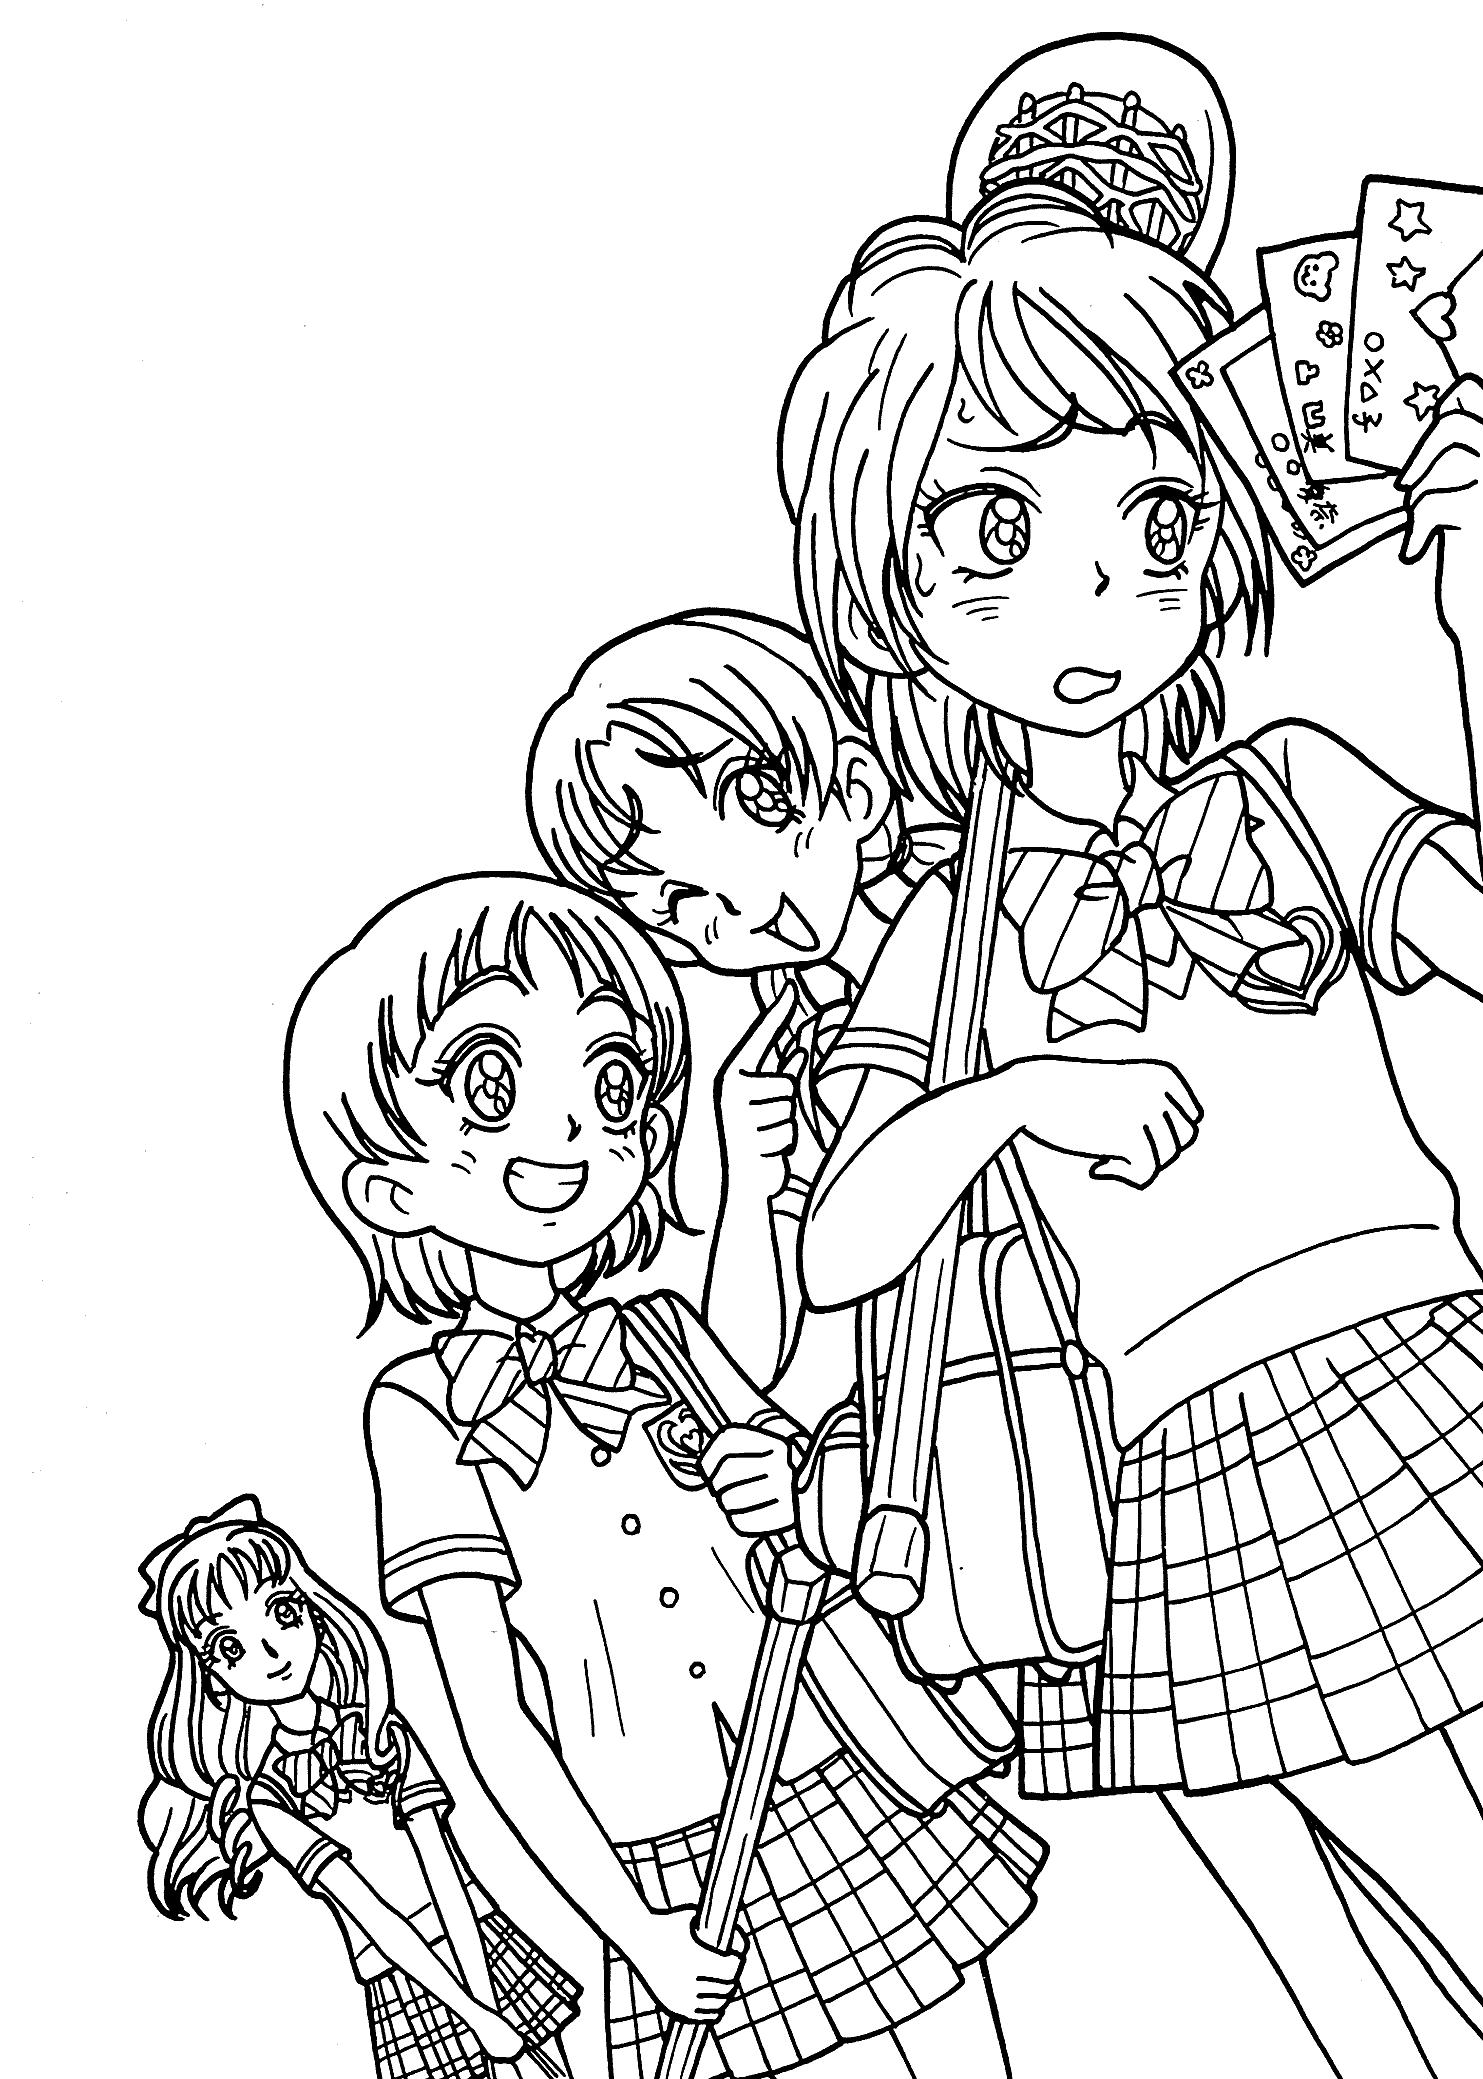 Anime Baby Girl Coloring Pages - Coloring Pages For All Ages - Coloring